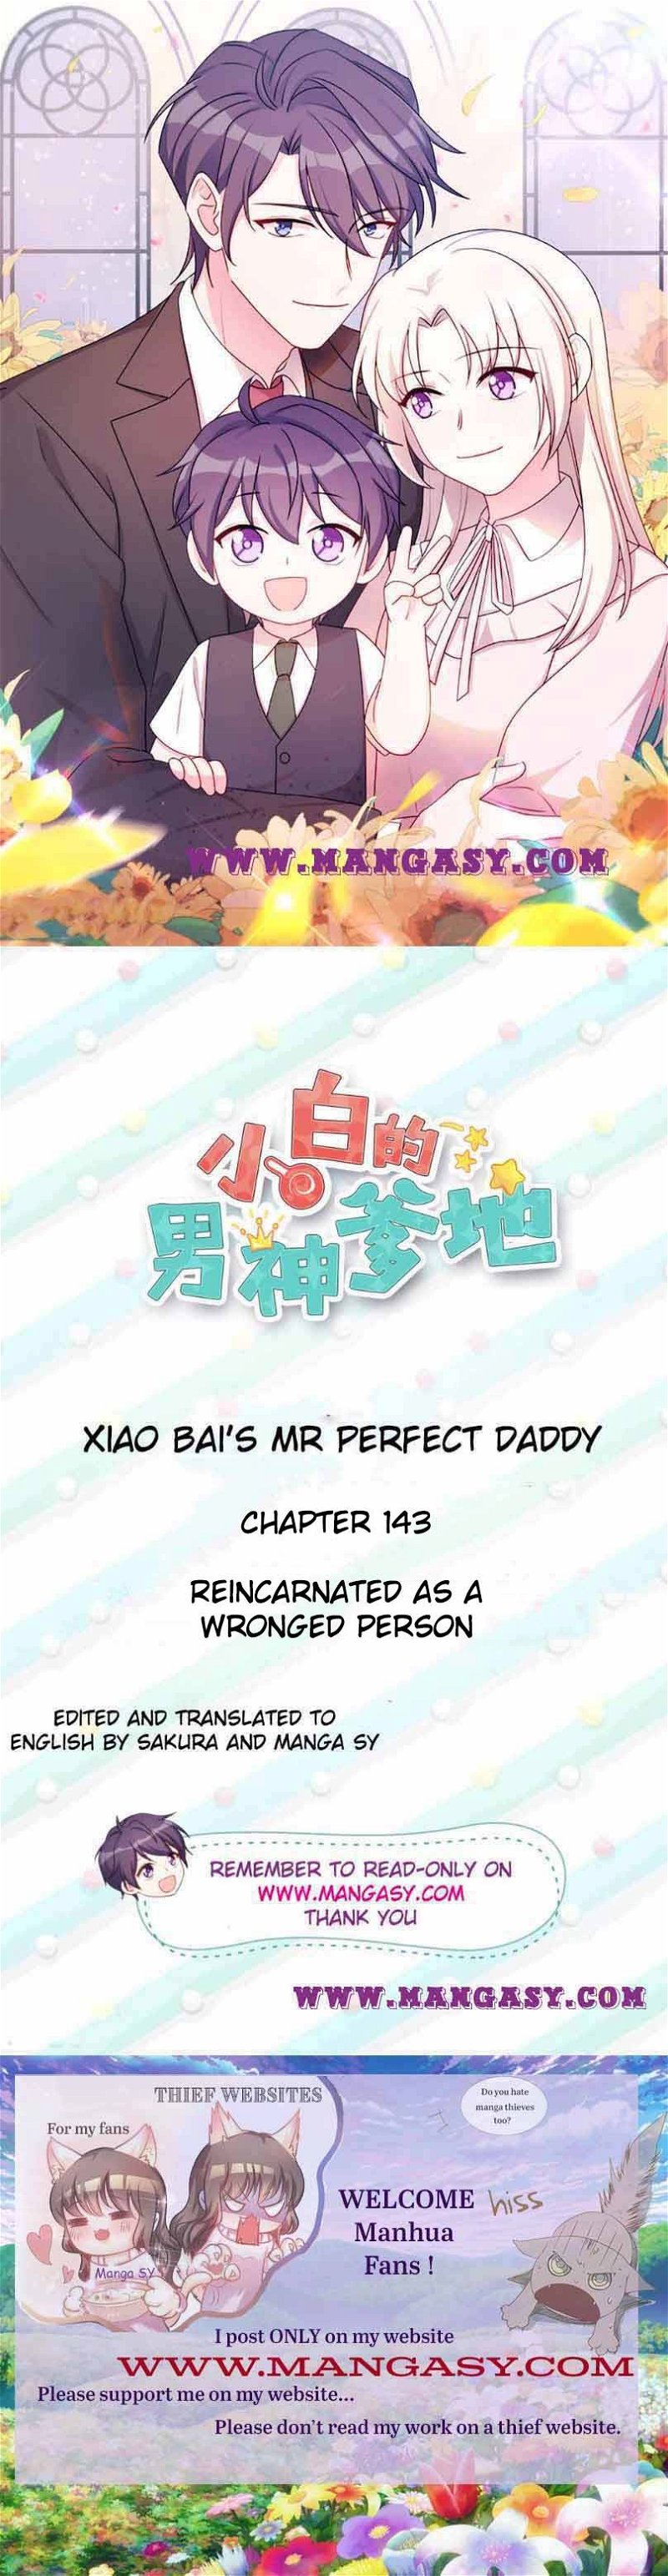 Xiao Bai’s father is a wonderful person Chapter 143 - Page 0